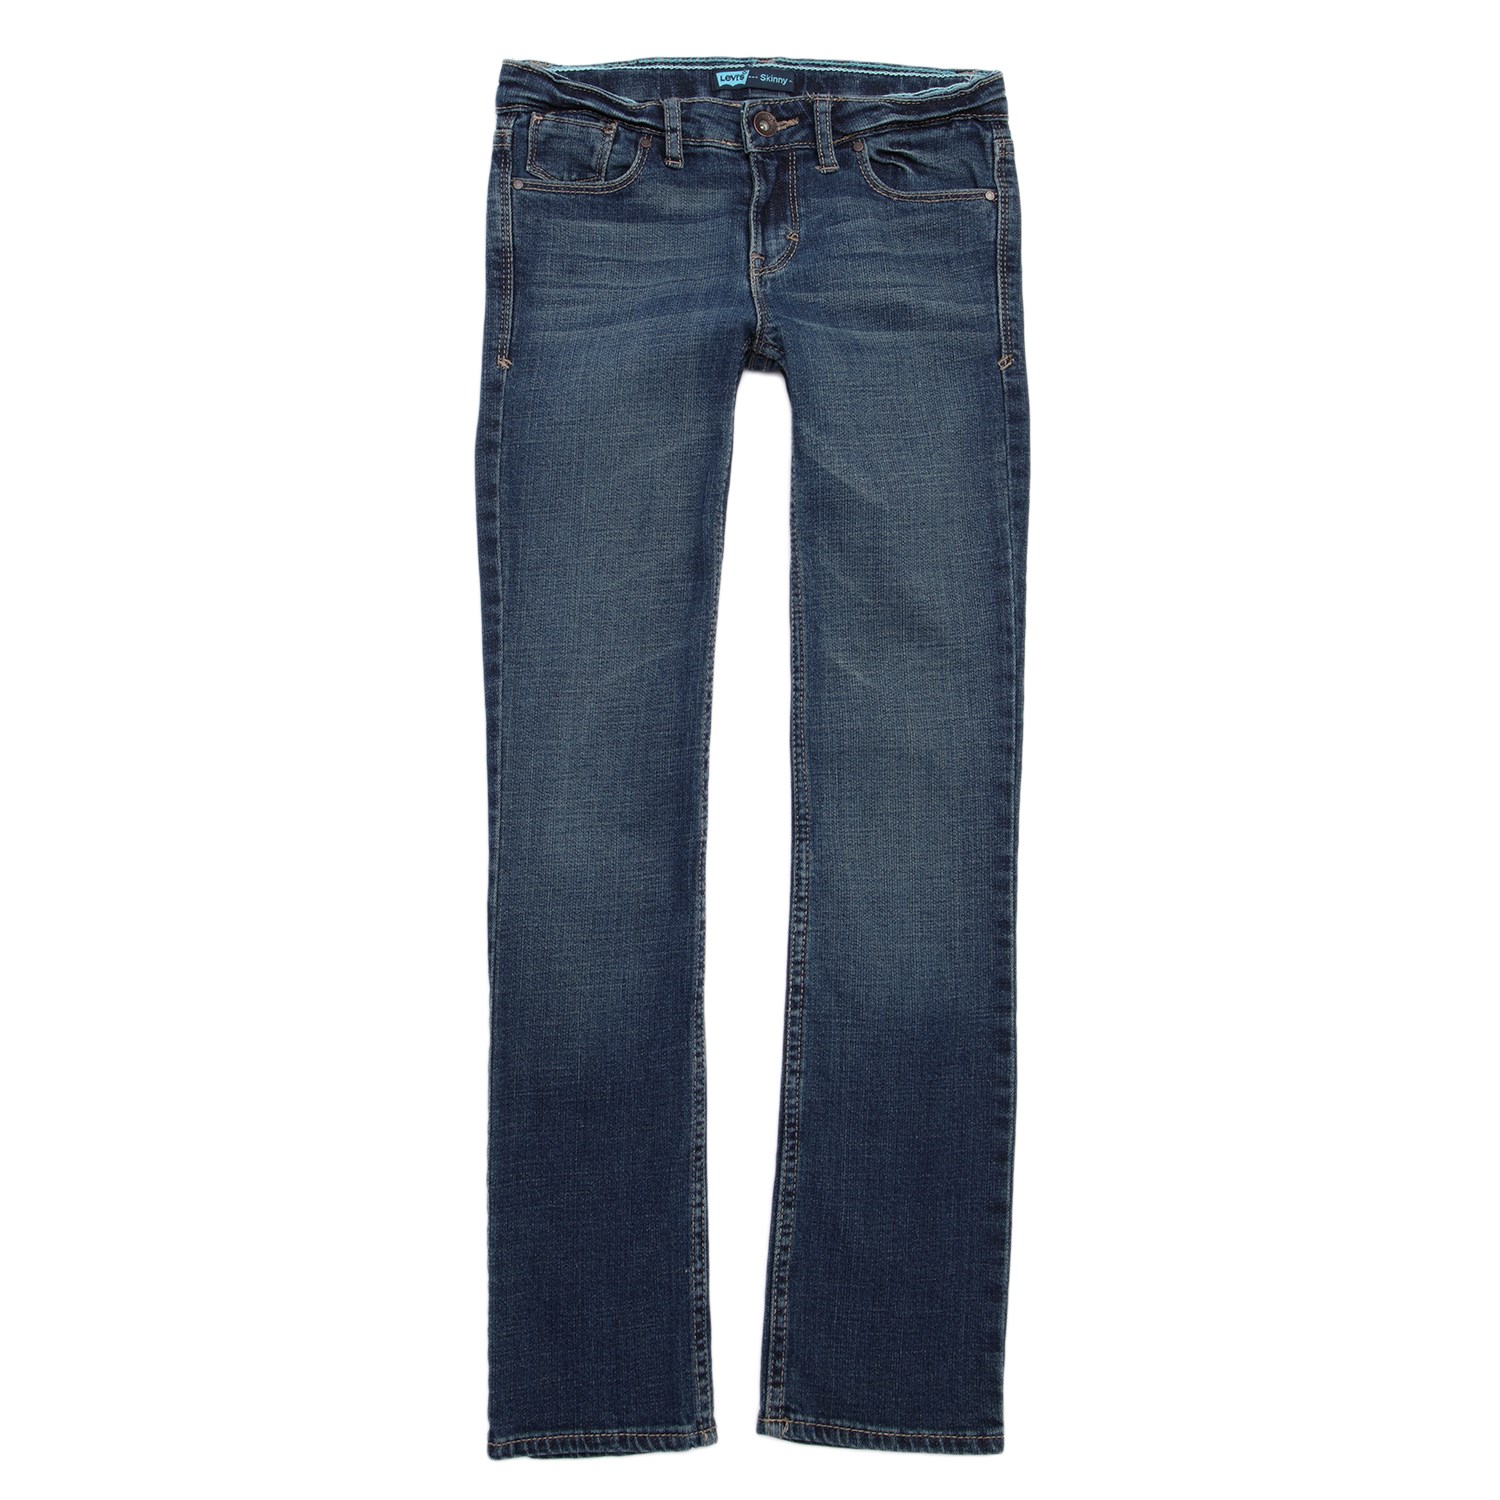 Levi's The Skinny Jeans (Ages 7-16) - Big Girls' | evo